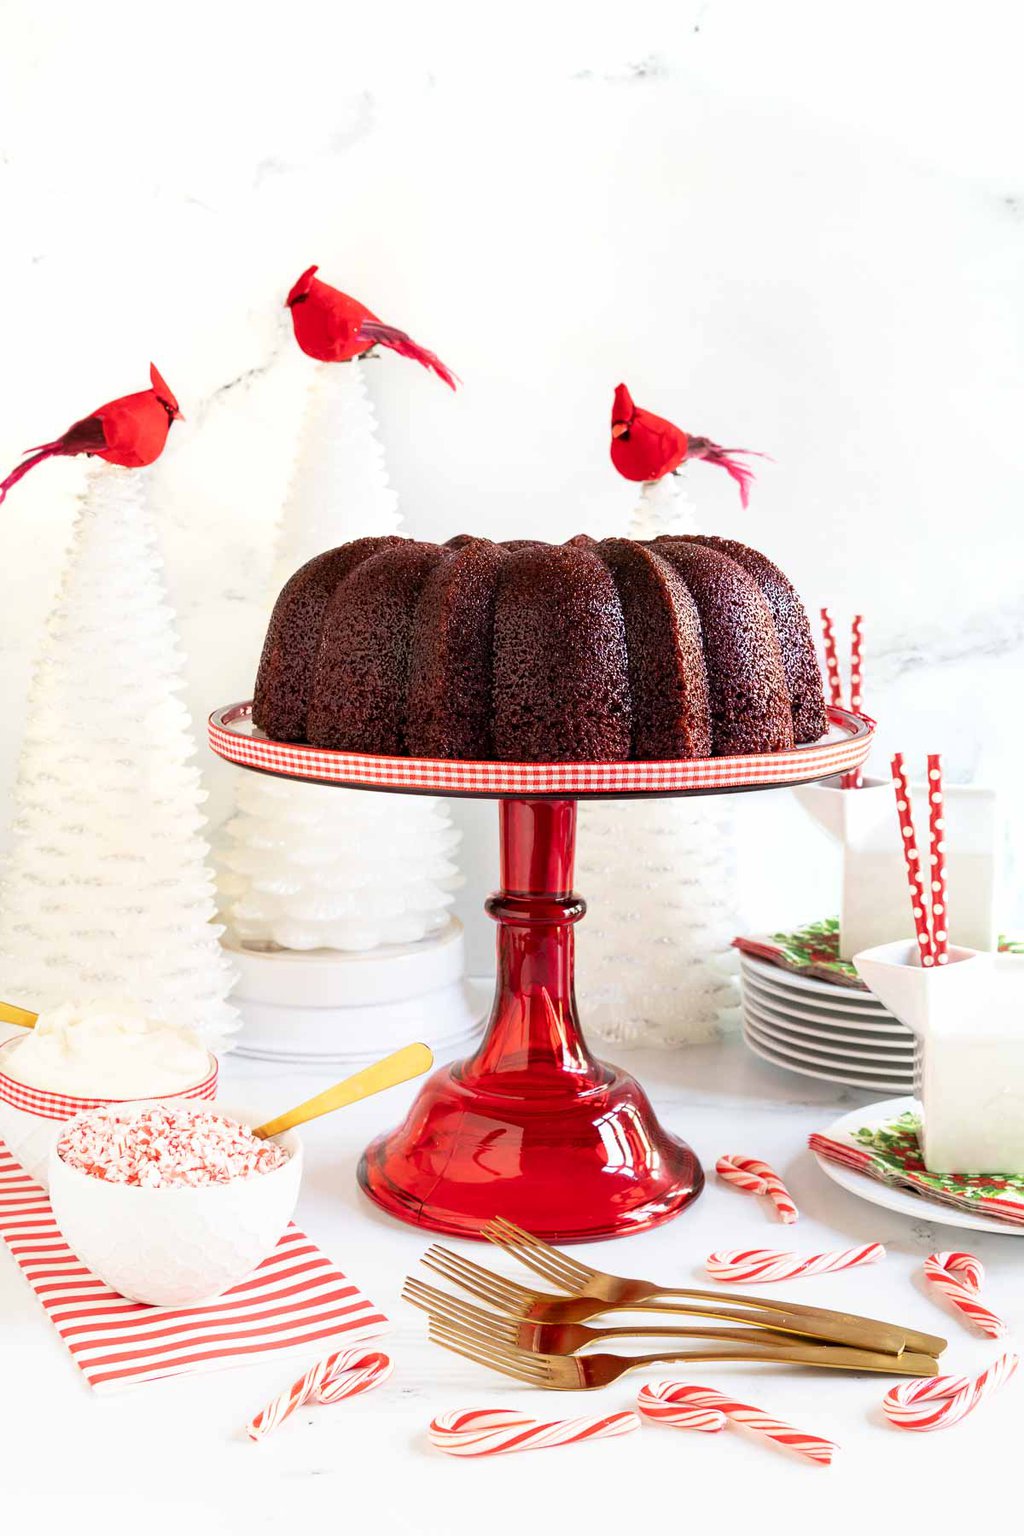 Vertical photo of a Ridiculously Easy Peppermint-Glazed Red Velvet Bundt Cake on a red glass pedestal cake stand surrounded by cardinals and candy canes.